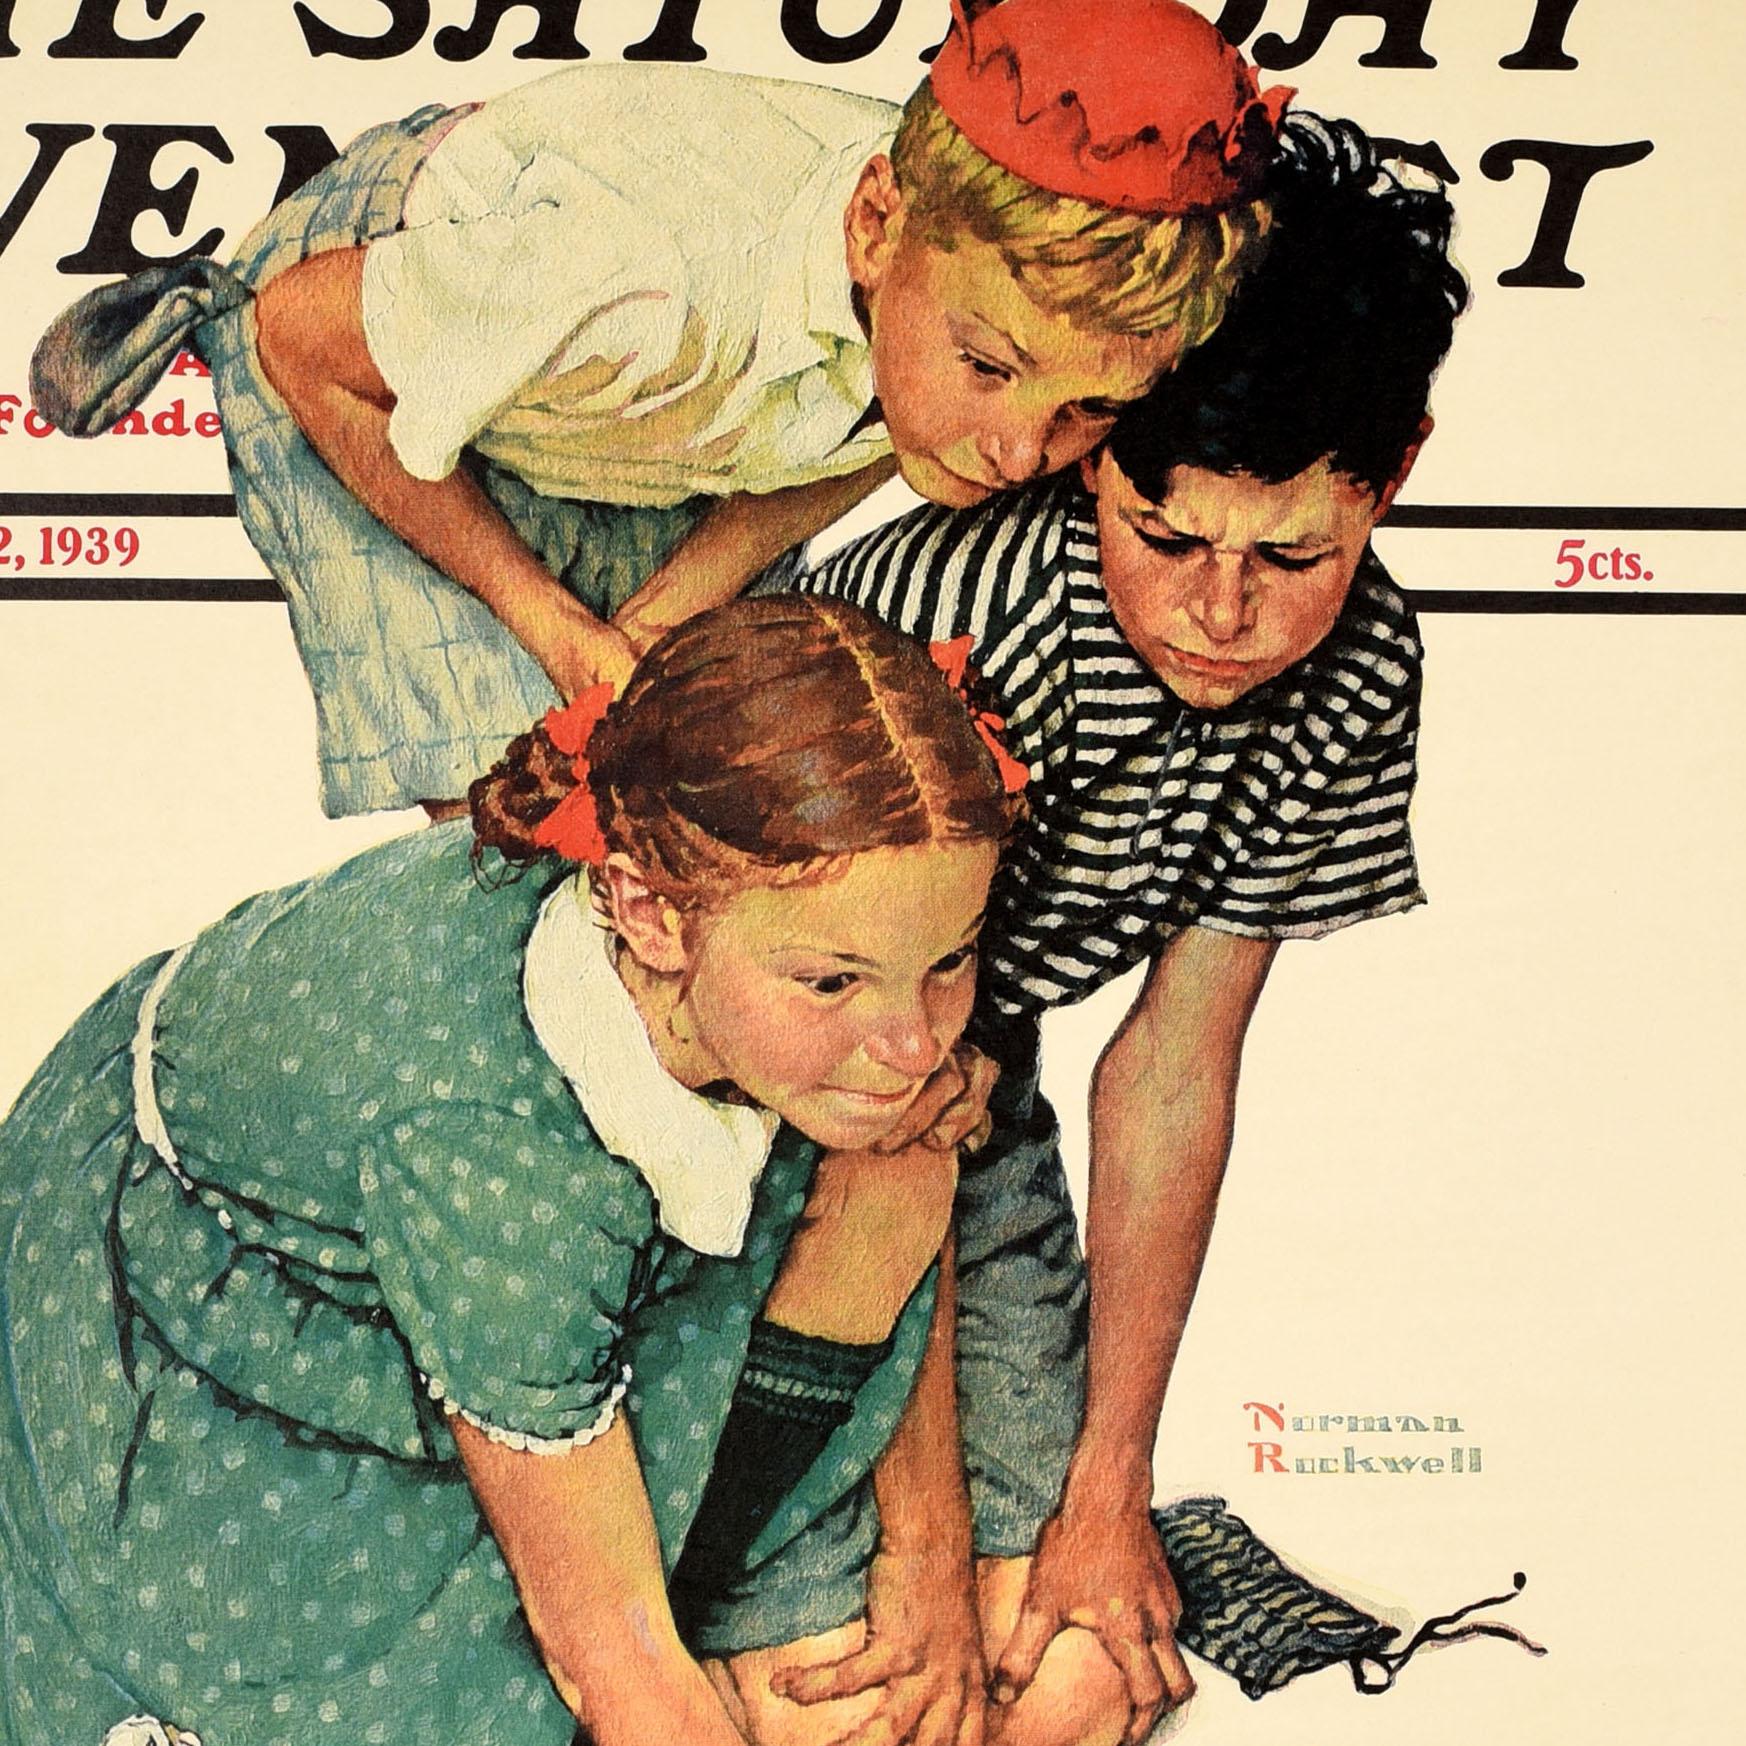 Original Vintage Advertising Poster Saturday Evening Post Children Playing - Print by Norman Rockwell